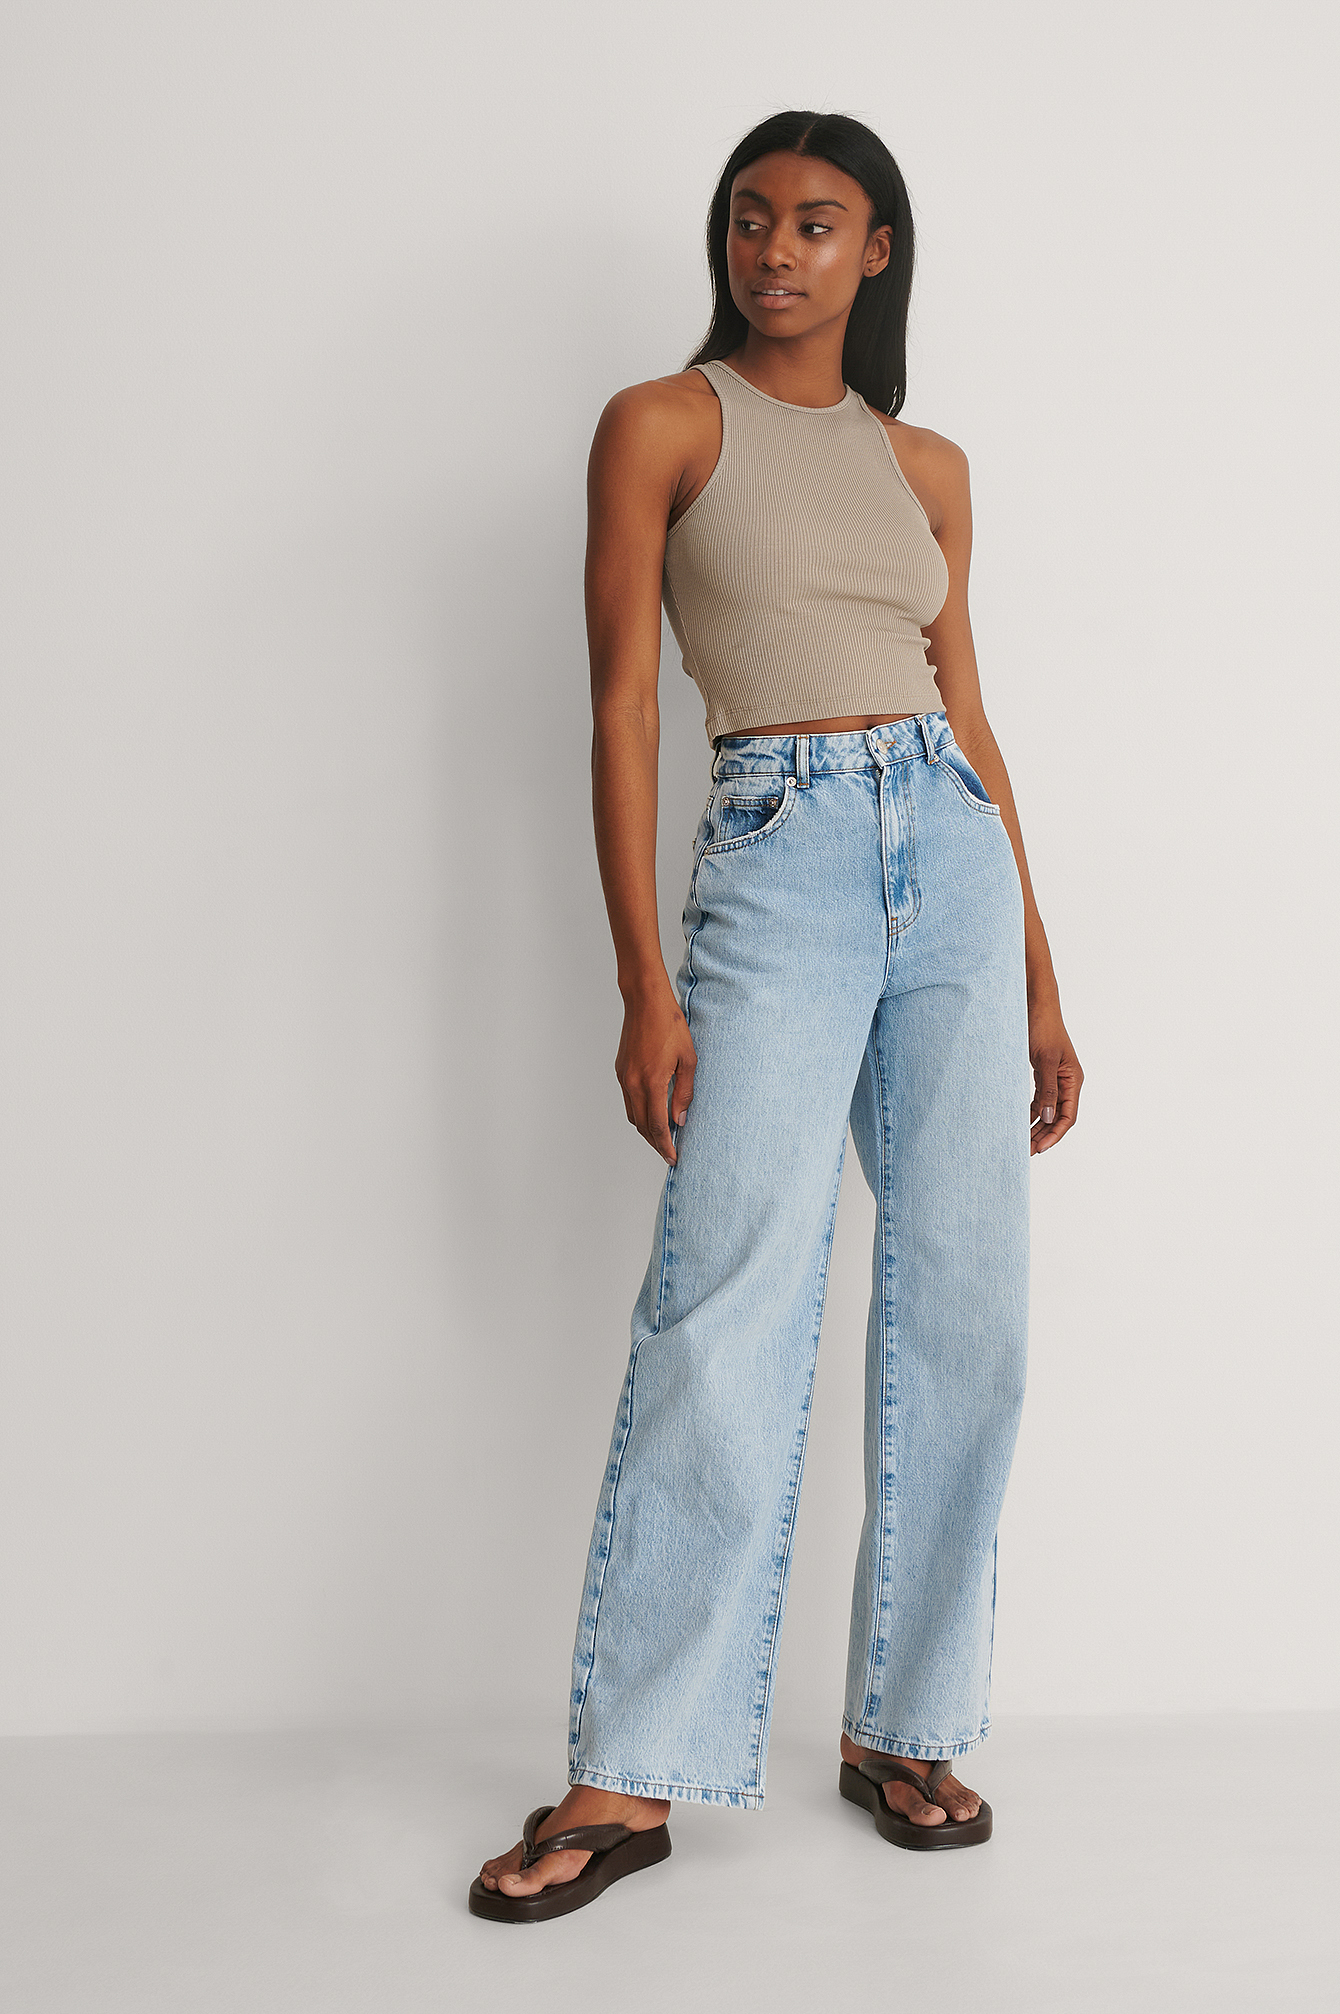 Back Cut Wide Leg High Waisted Jeans Outfit.